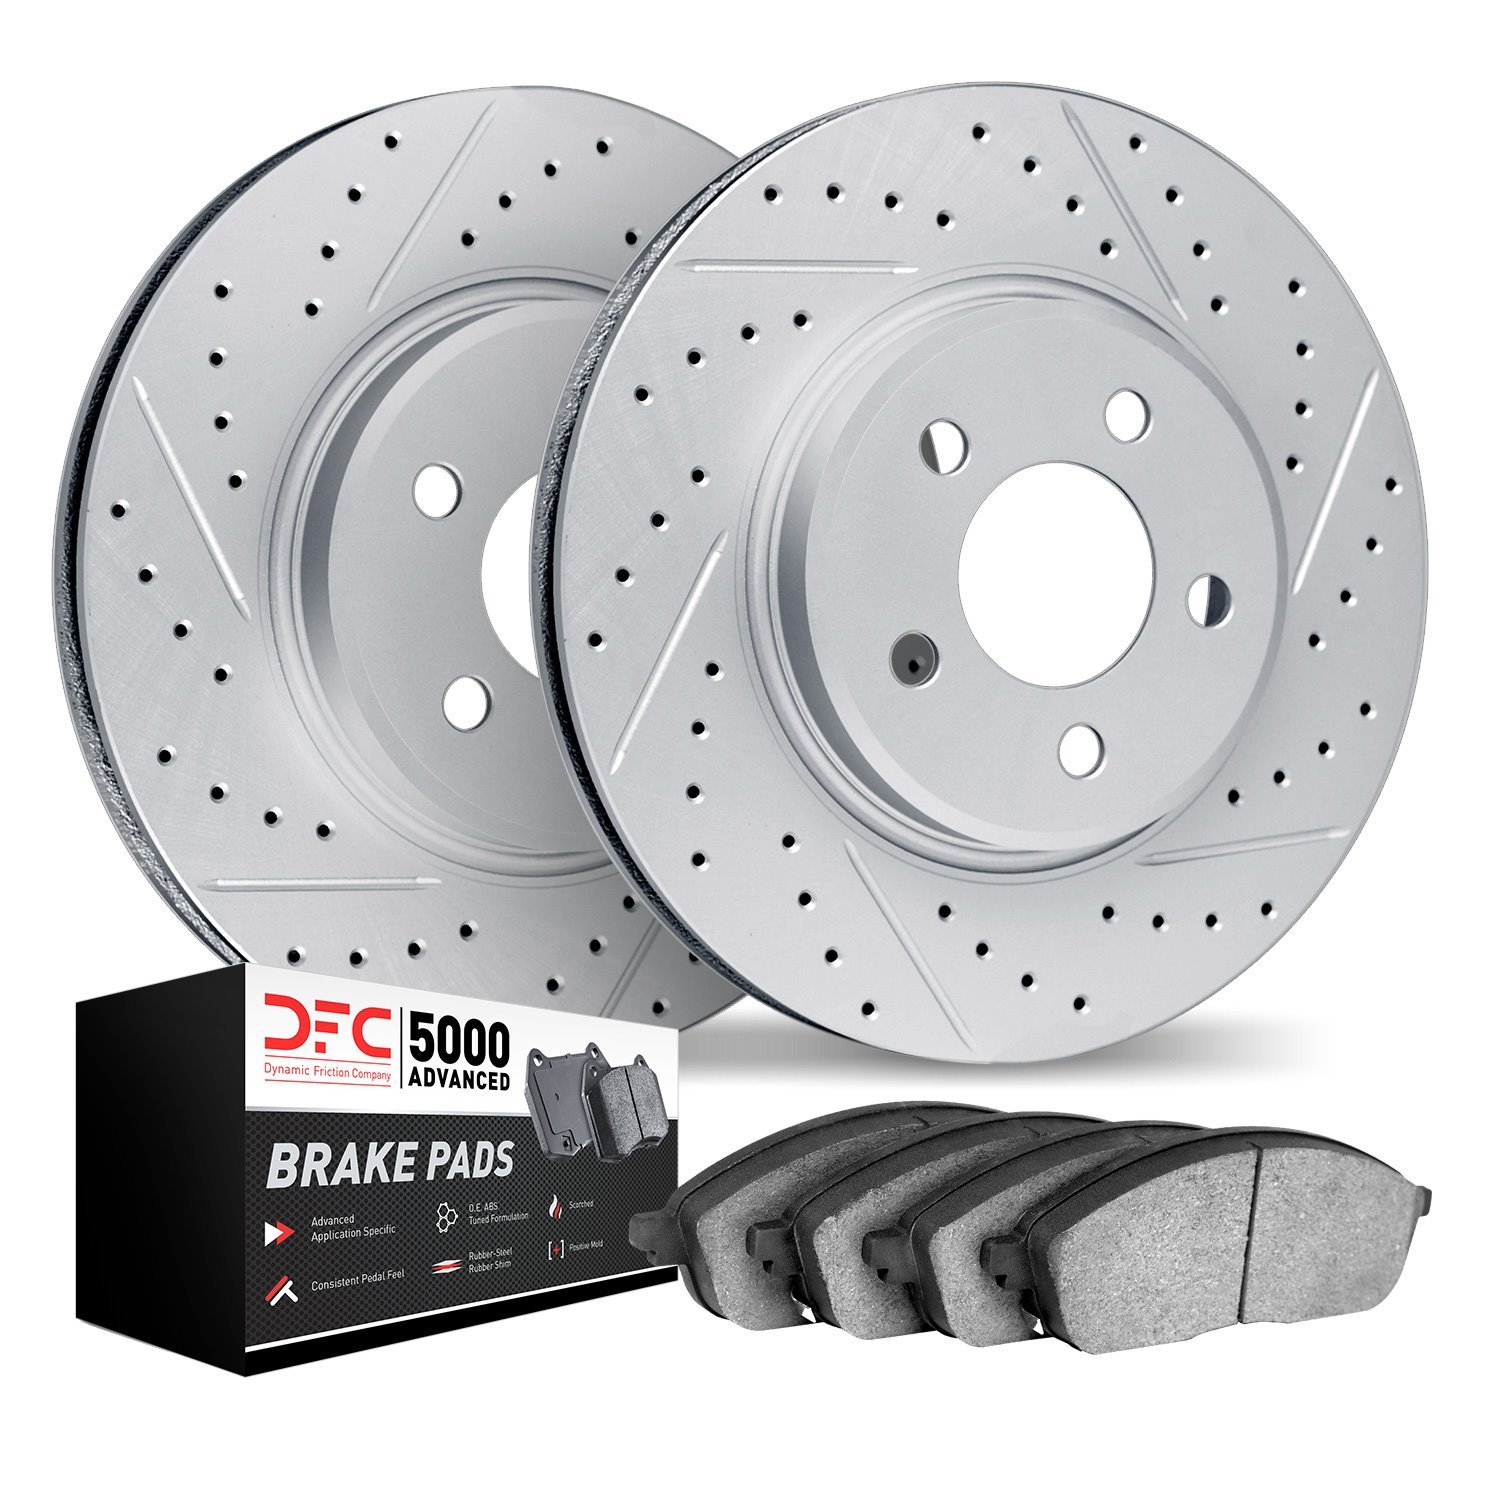 2502-20007 Geoperformance Drilled/Slotted Rotors w/5000 Advanced Brake Pads Kit, 2001-2008 Multiple Makes/Models, Position: Fron